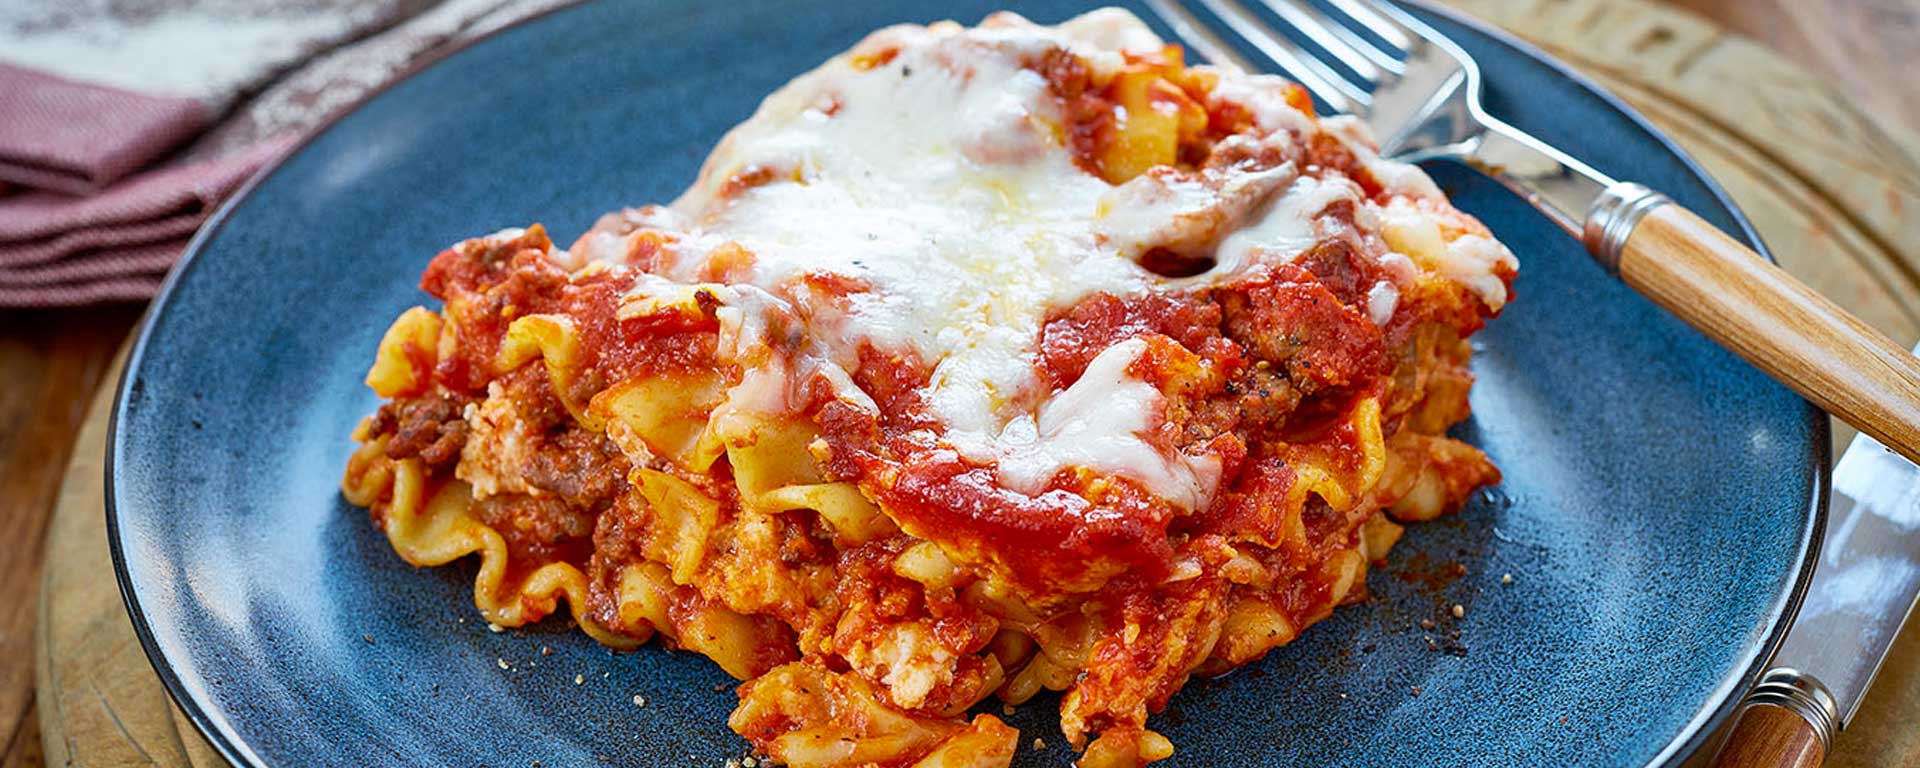 Photo of - Easy Slow Cooker Lasagna